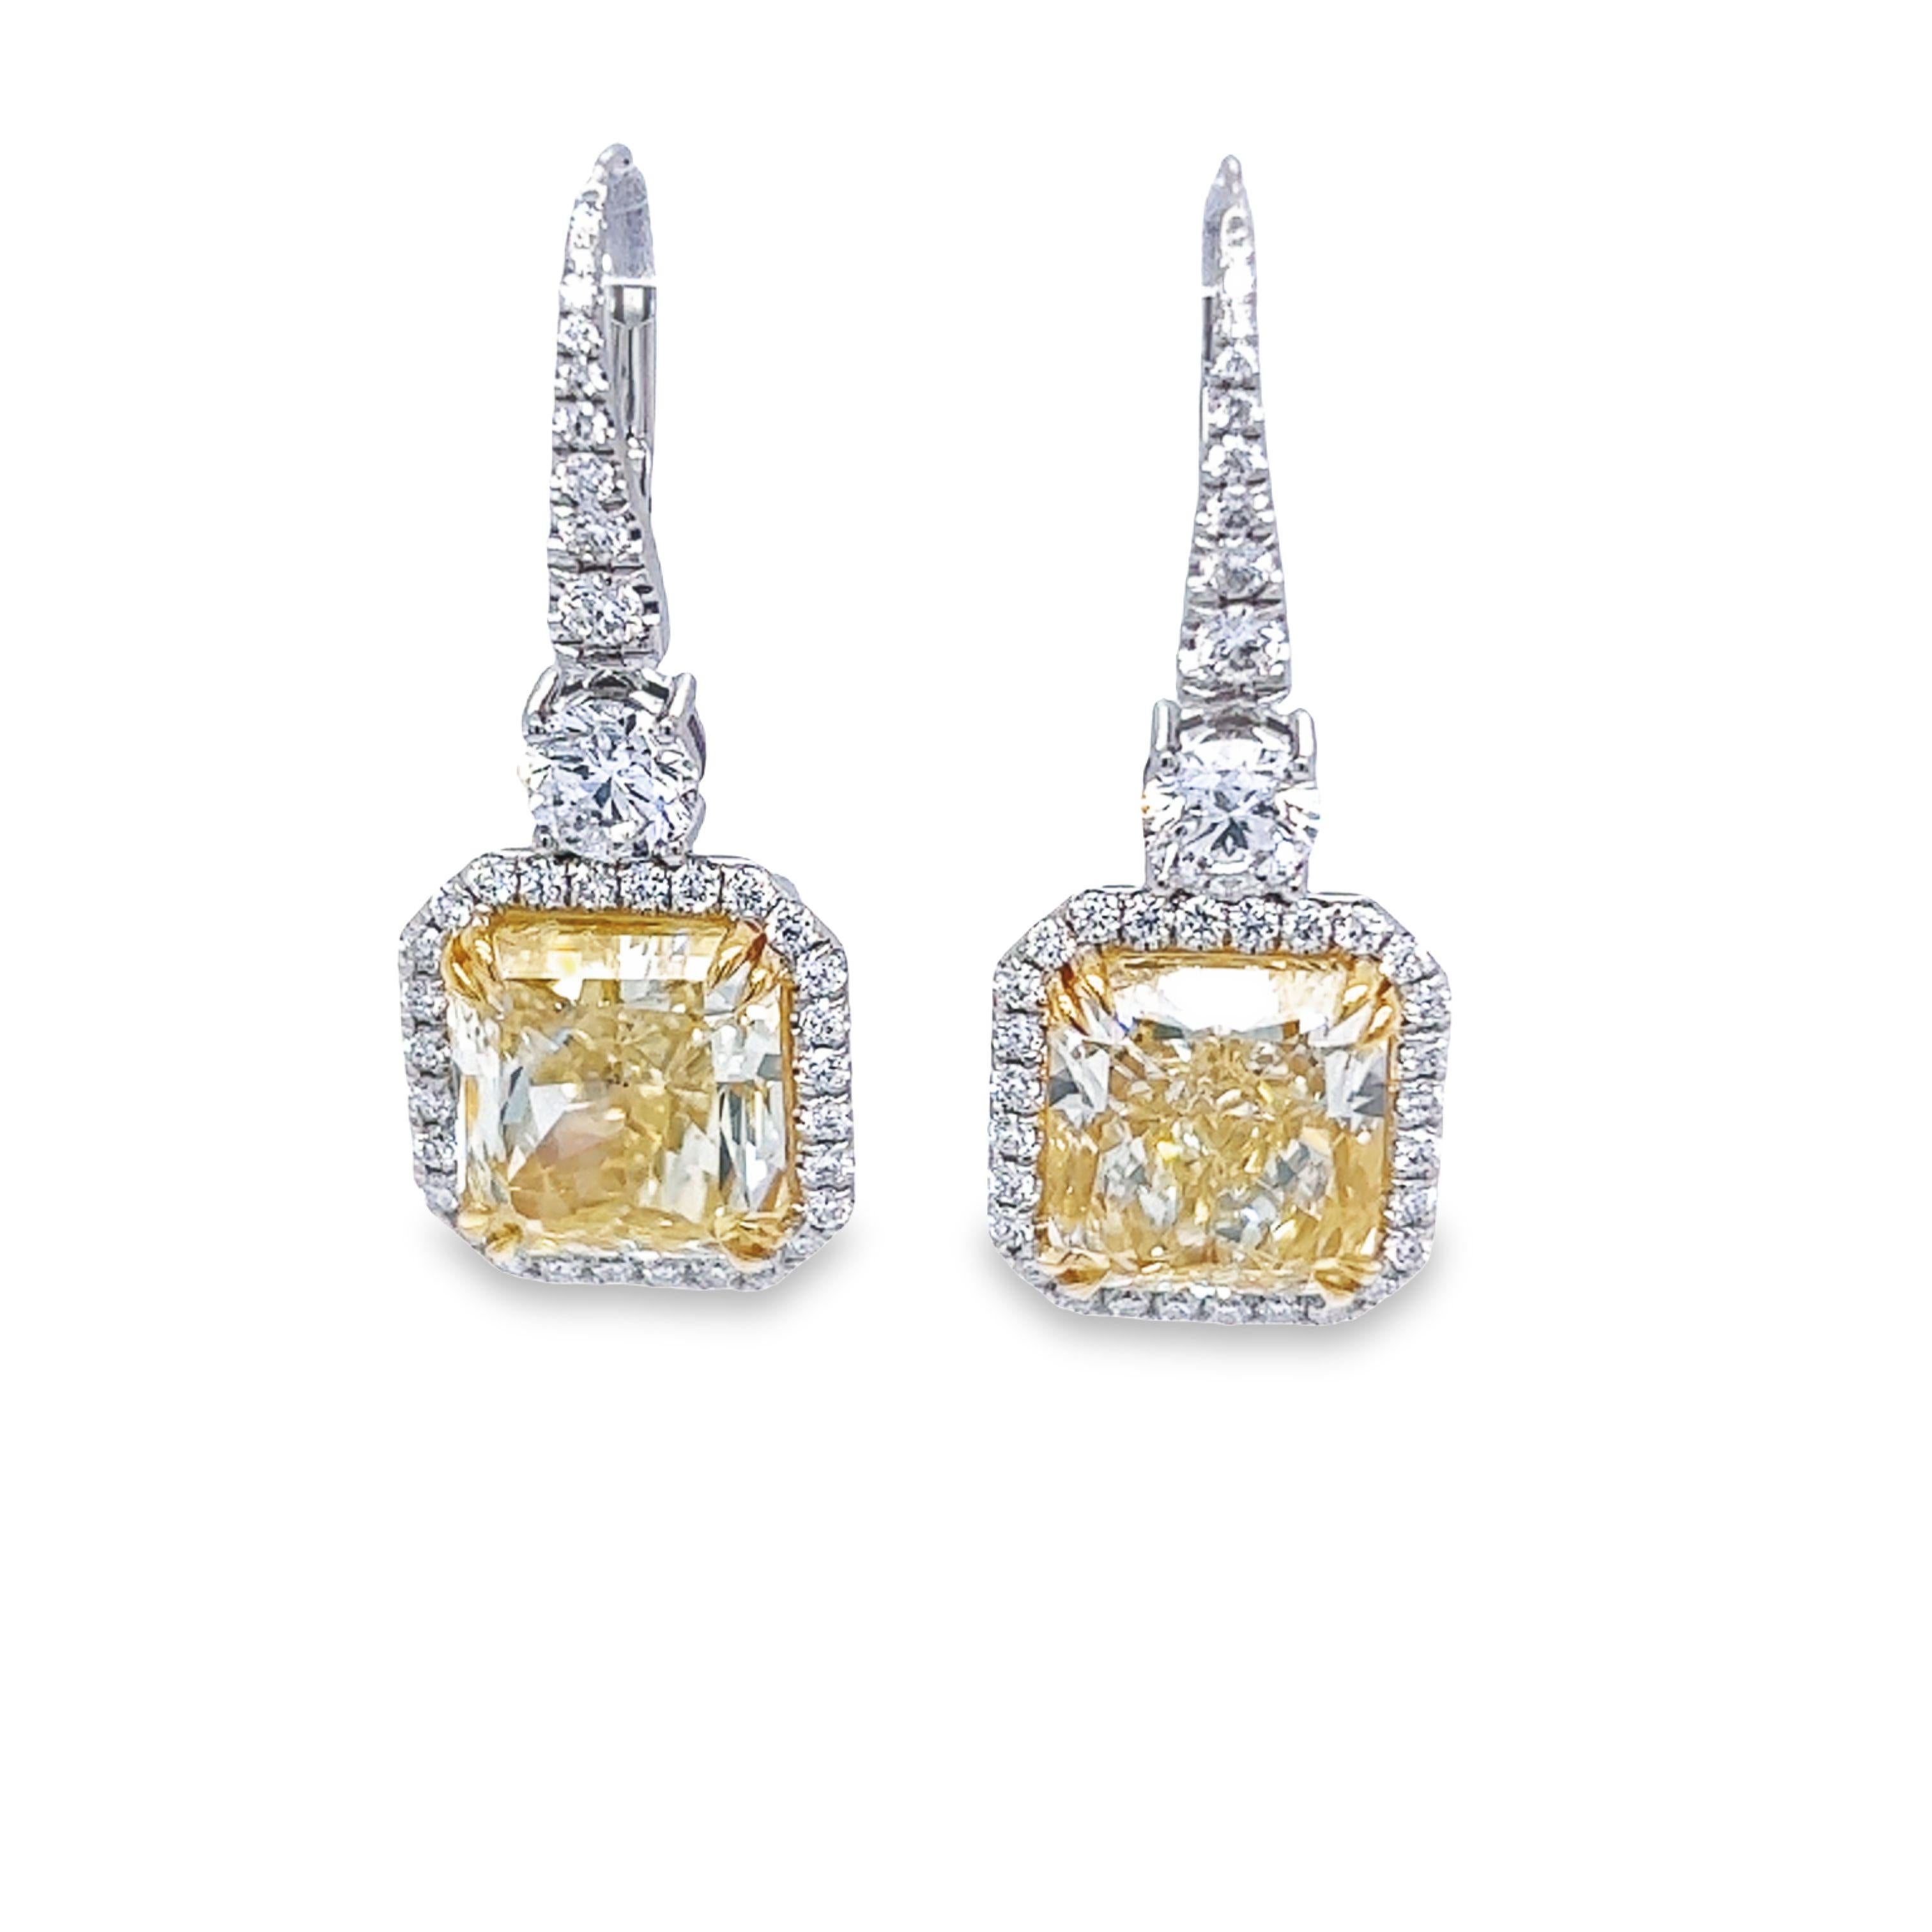 A beautifully matched 12.21tw Radiant Fancy Yellow VS2-SI1 clarity diamond earrings are GIA Certified. These gorgeous light weight dangling earrings set in platinum & 18k yellow gold also features a matched pair of 1.01 carat total weight of Round 